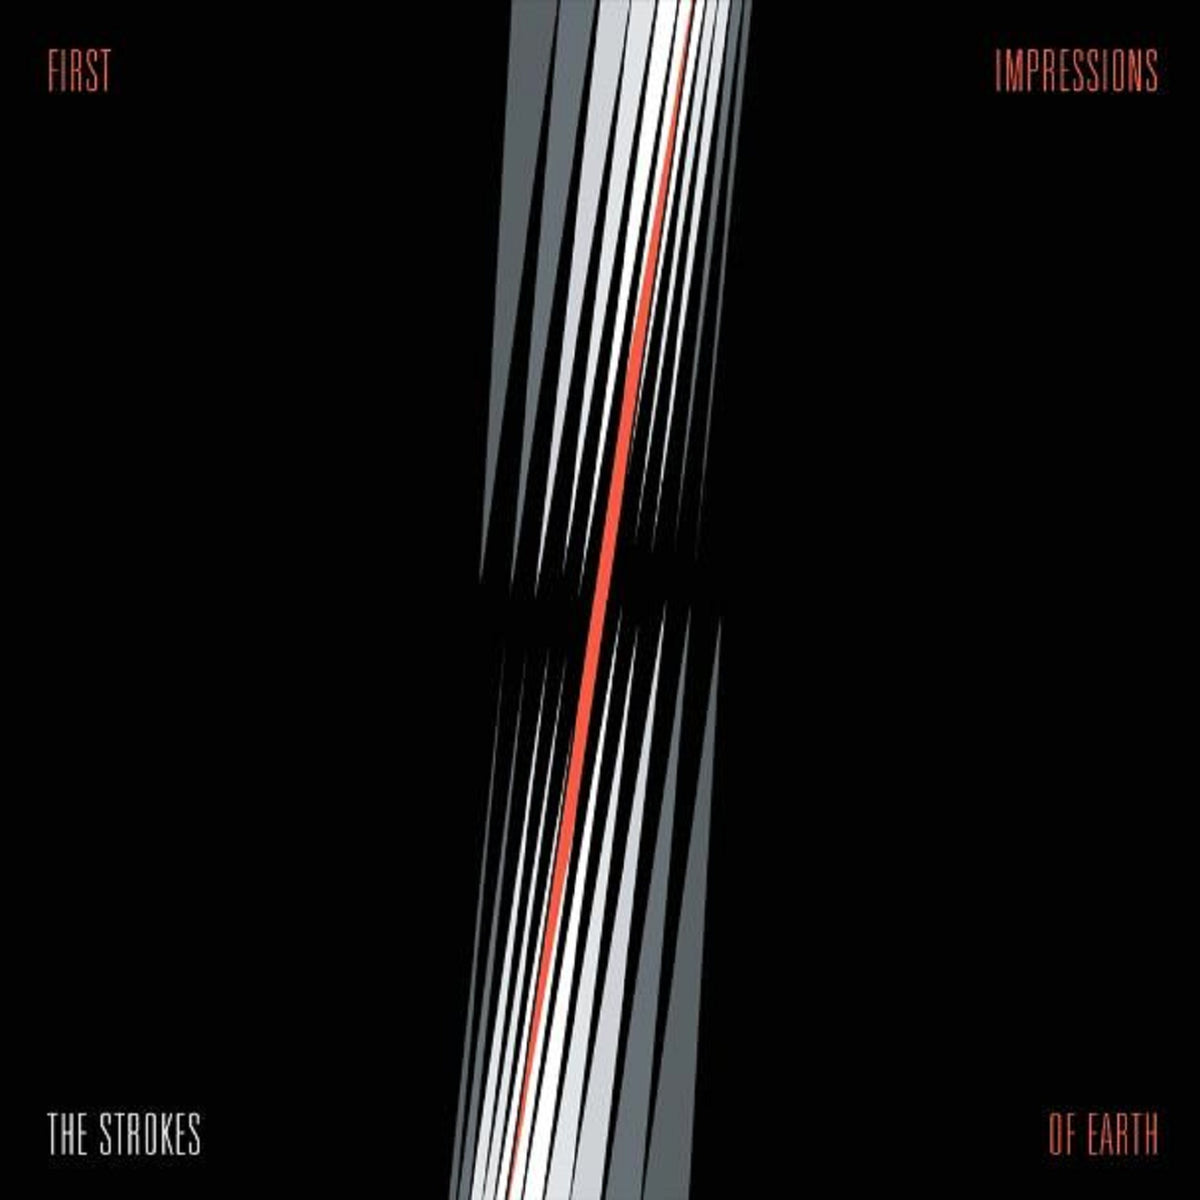 The Strokes - First Impressions of Earth - BROKEN 8 RECORDS